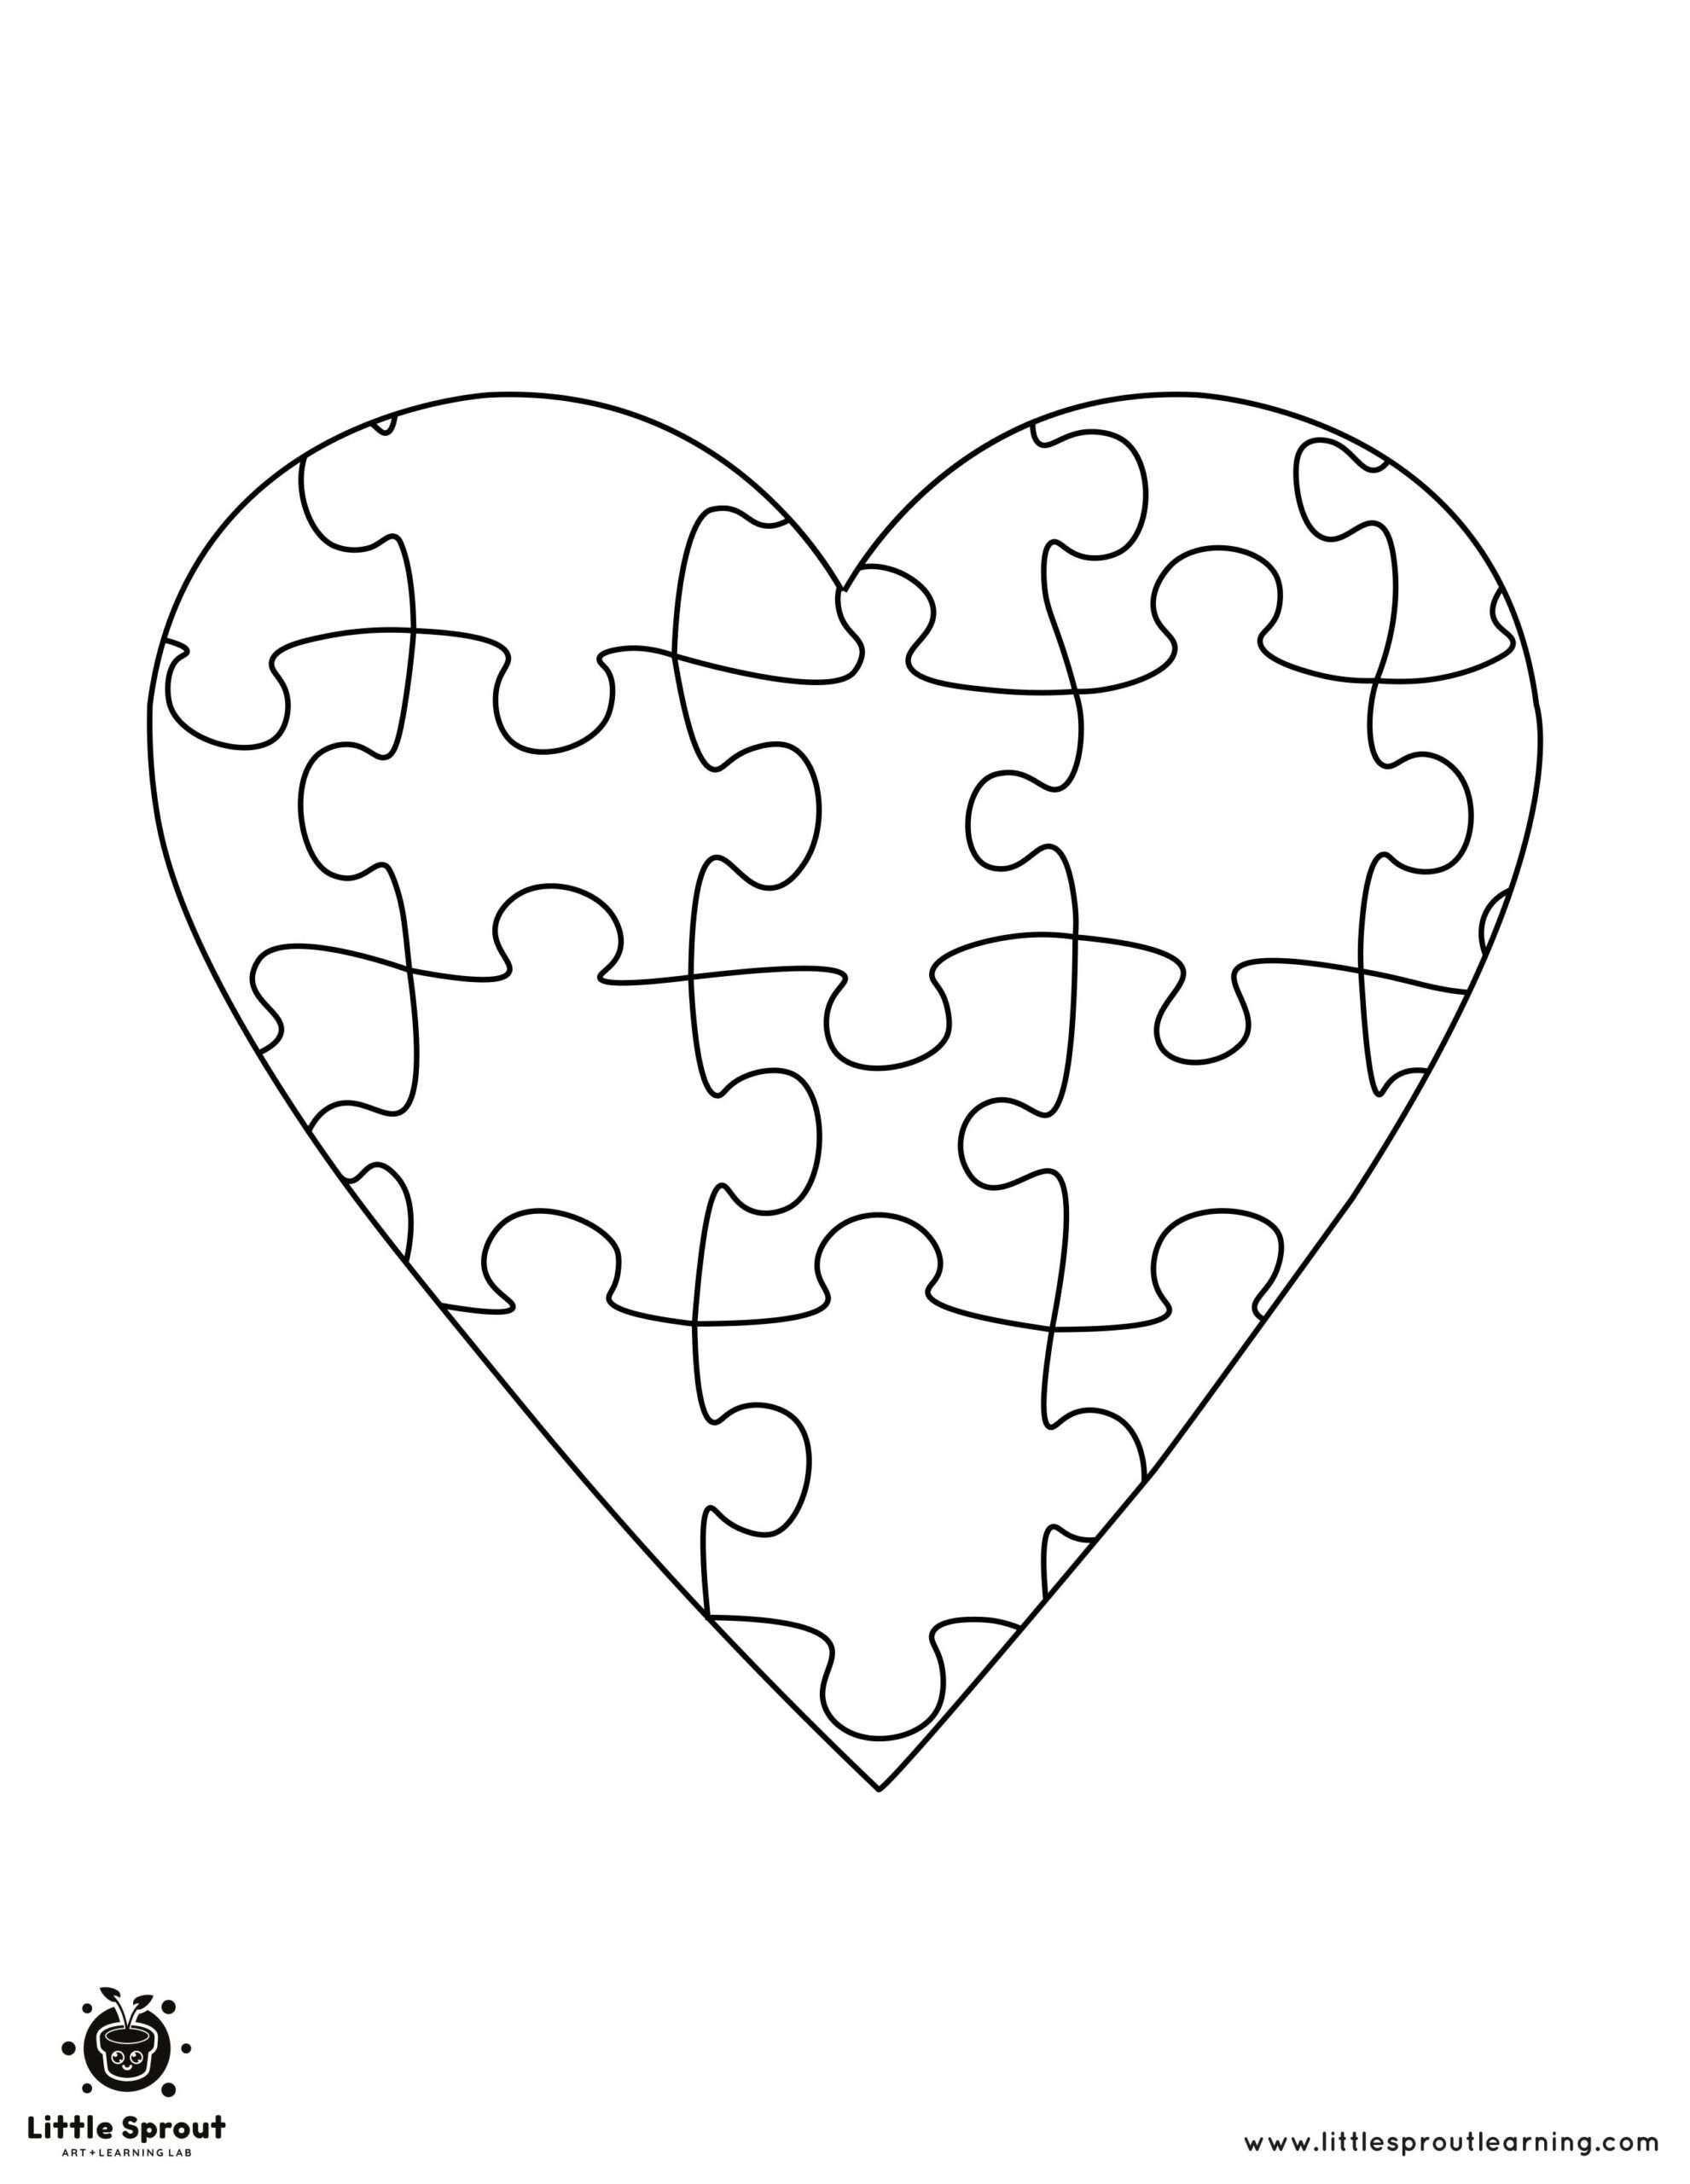 Puzzled Heart Coloring Page